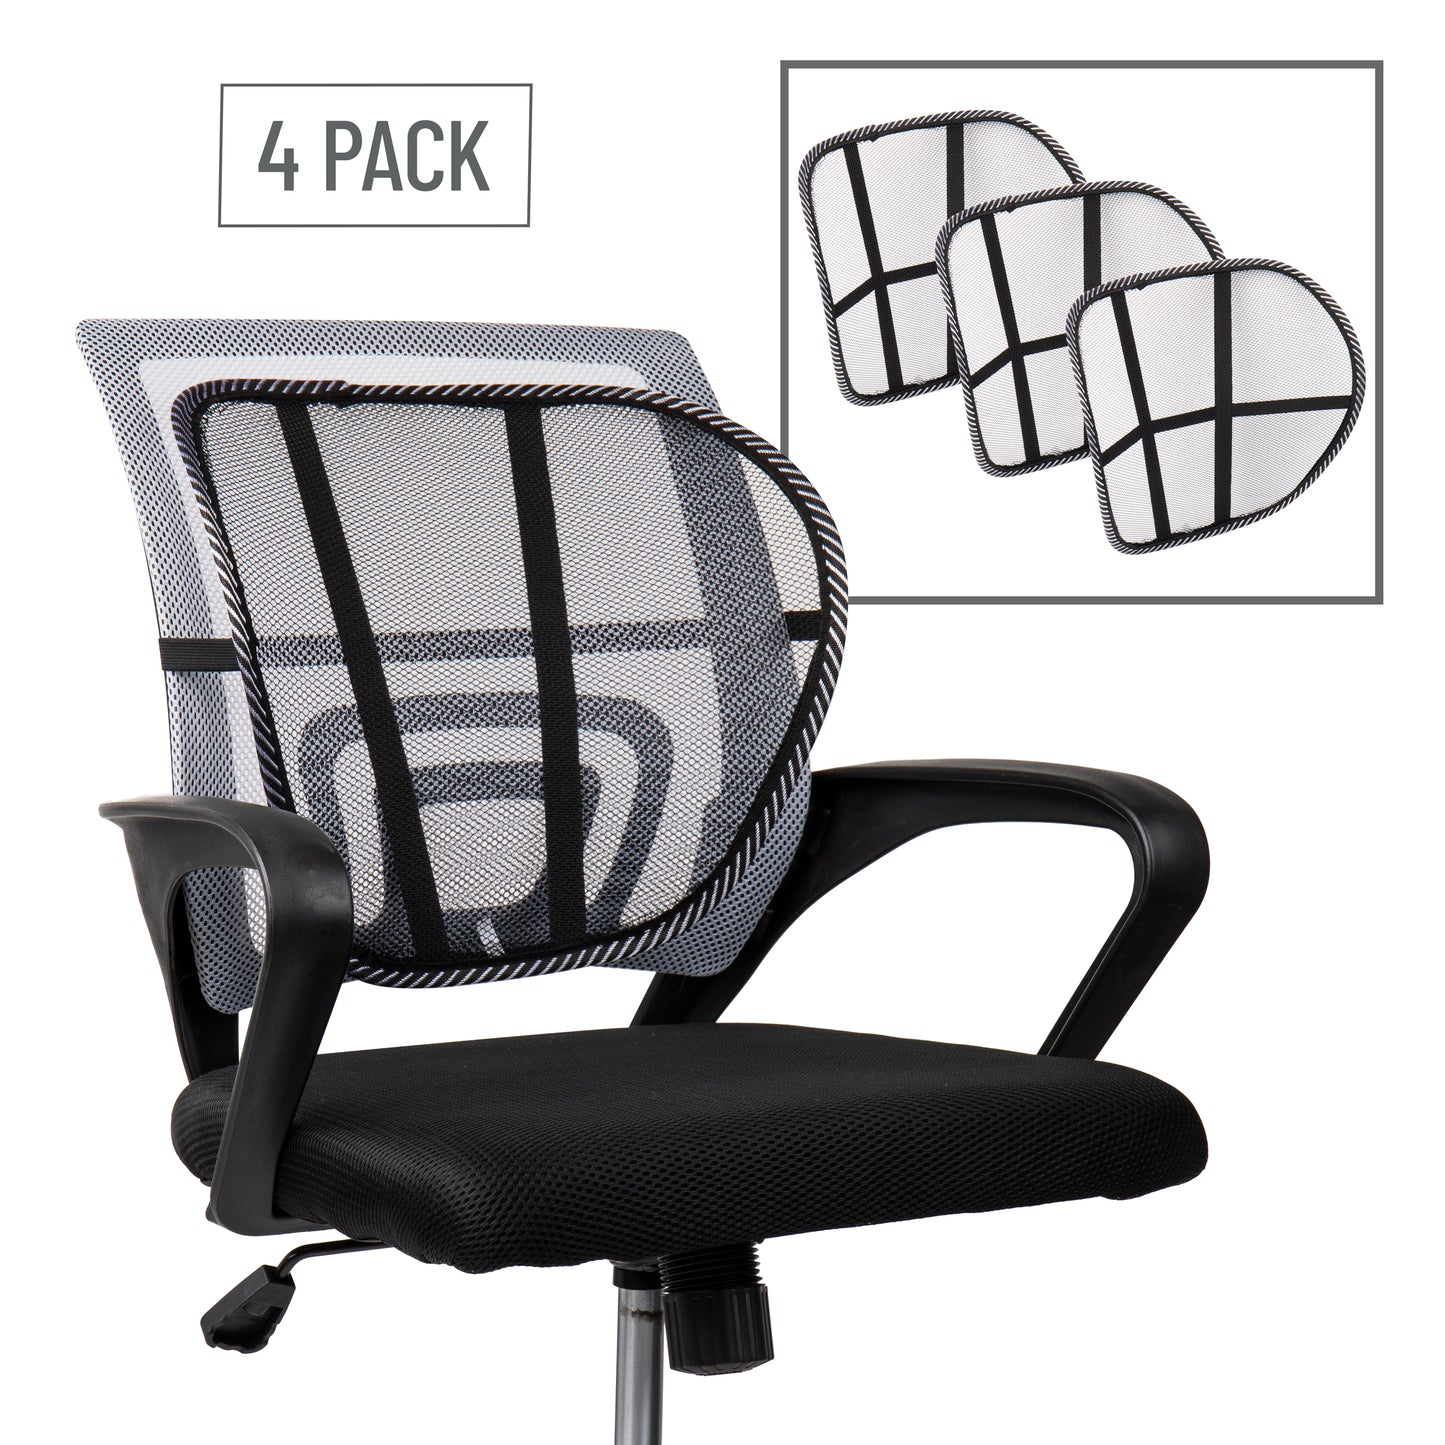 Mesh Back Lumbar Support Car Back Support for Driving Seat Office